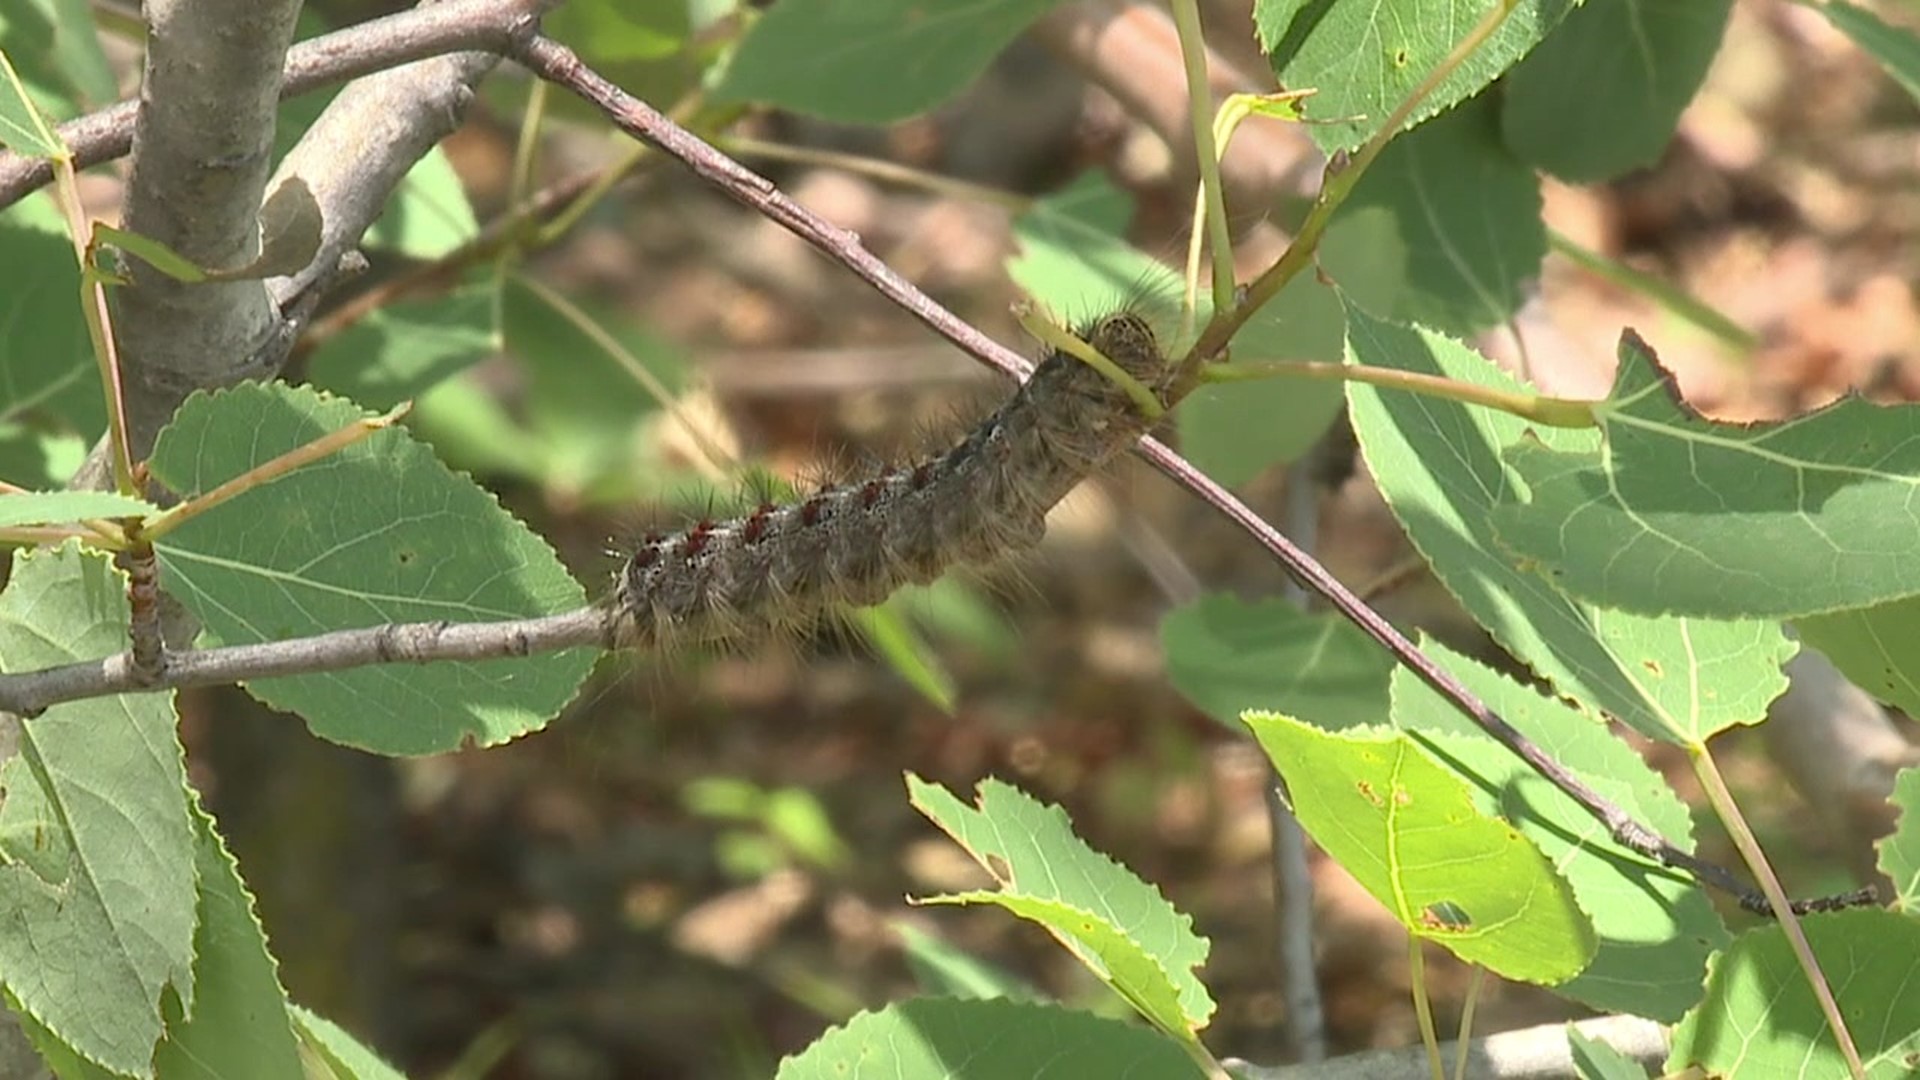 We are still months away from trees getting their leaves, but state foresters are already concerned about an invasive bug known for eating them all.